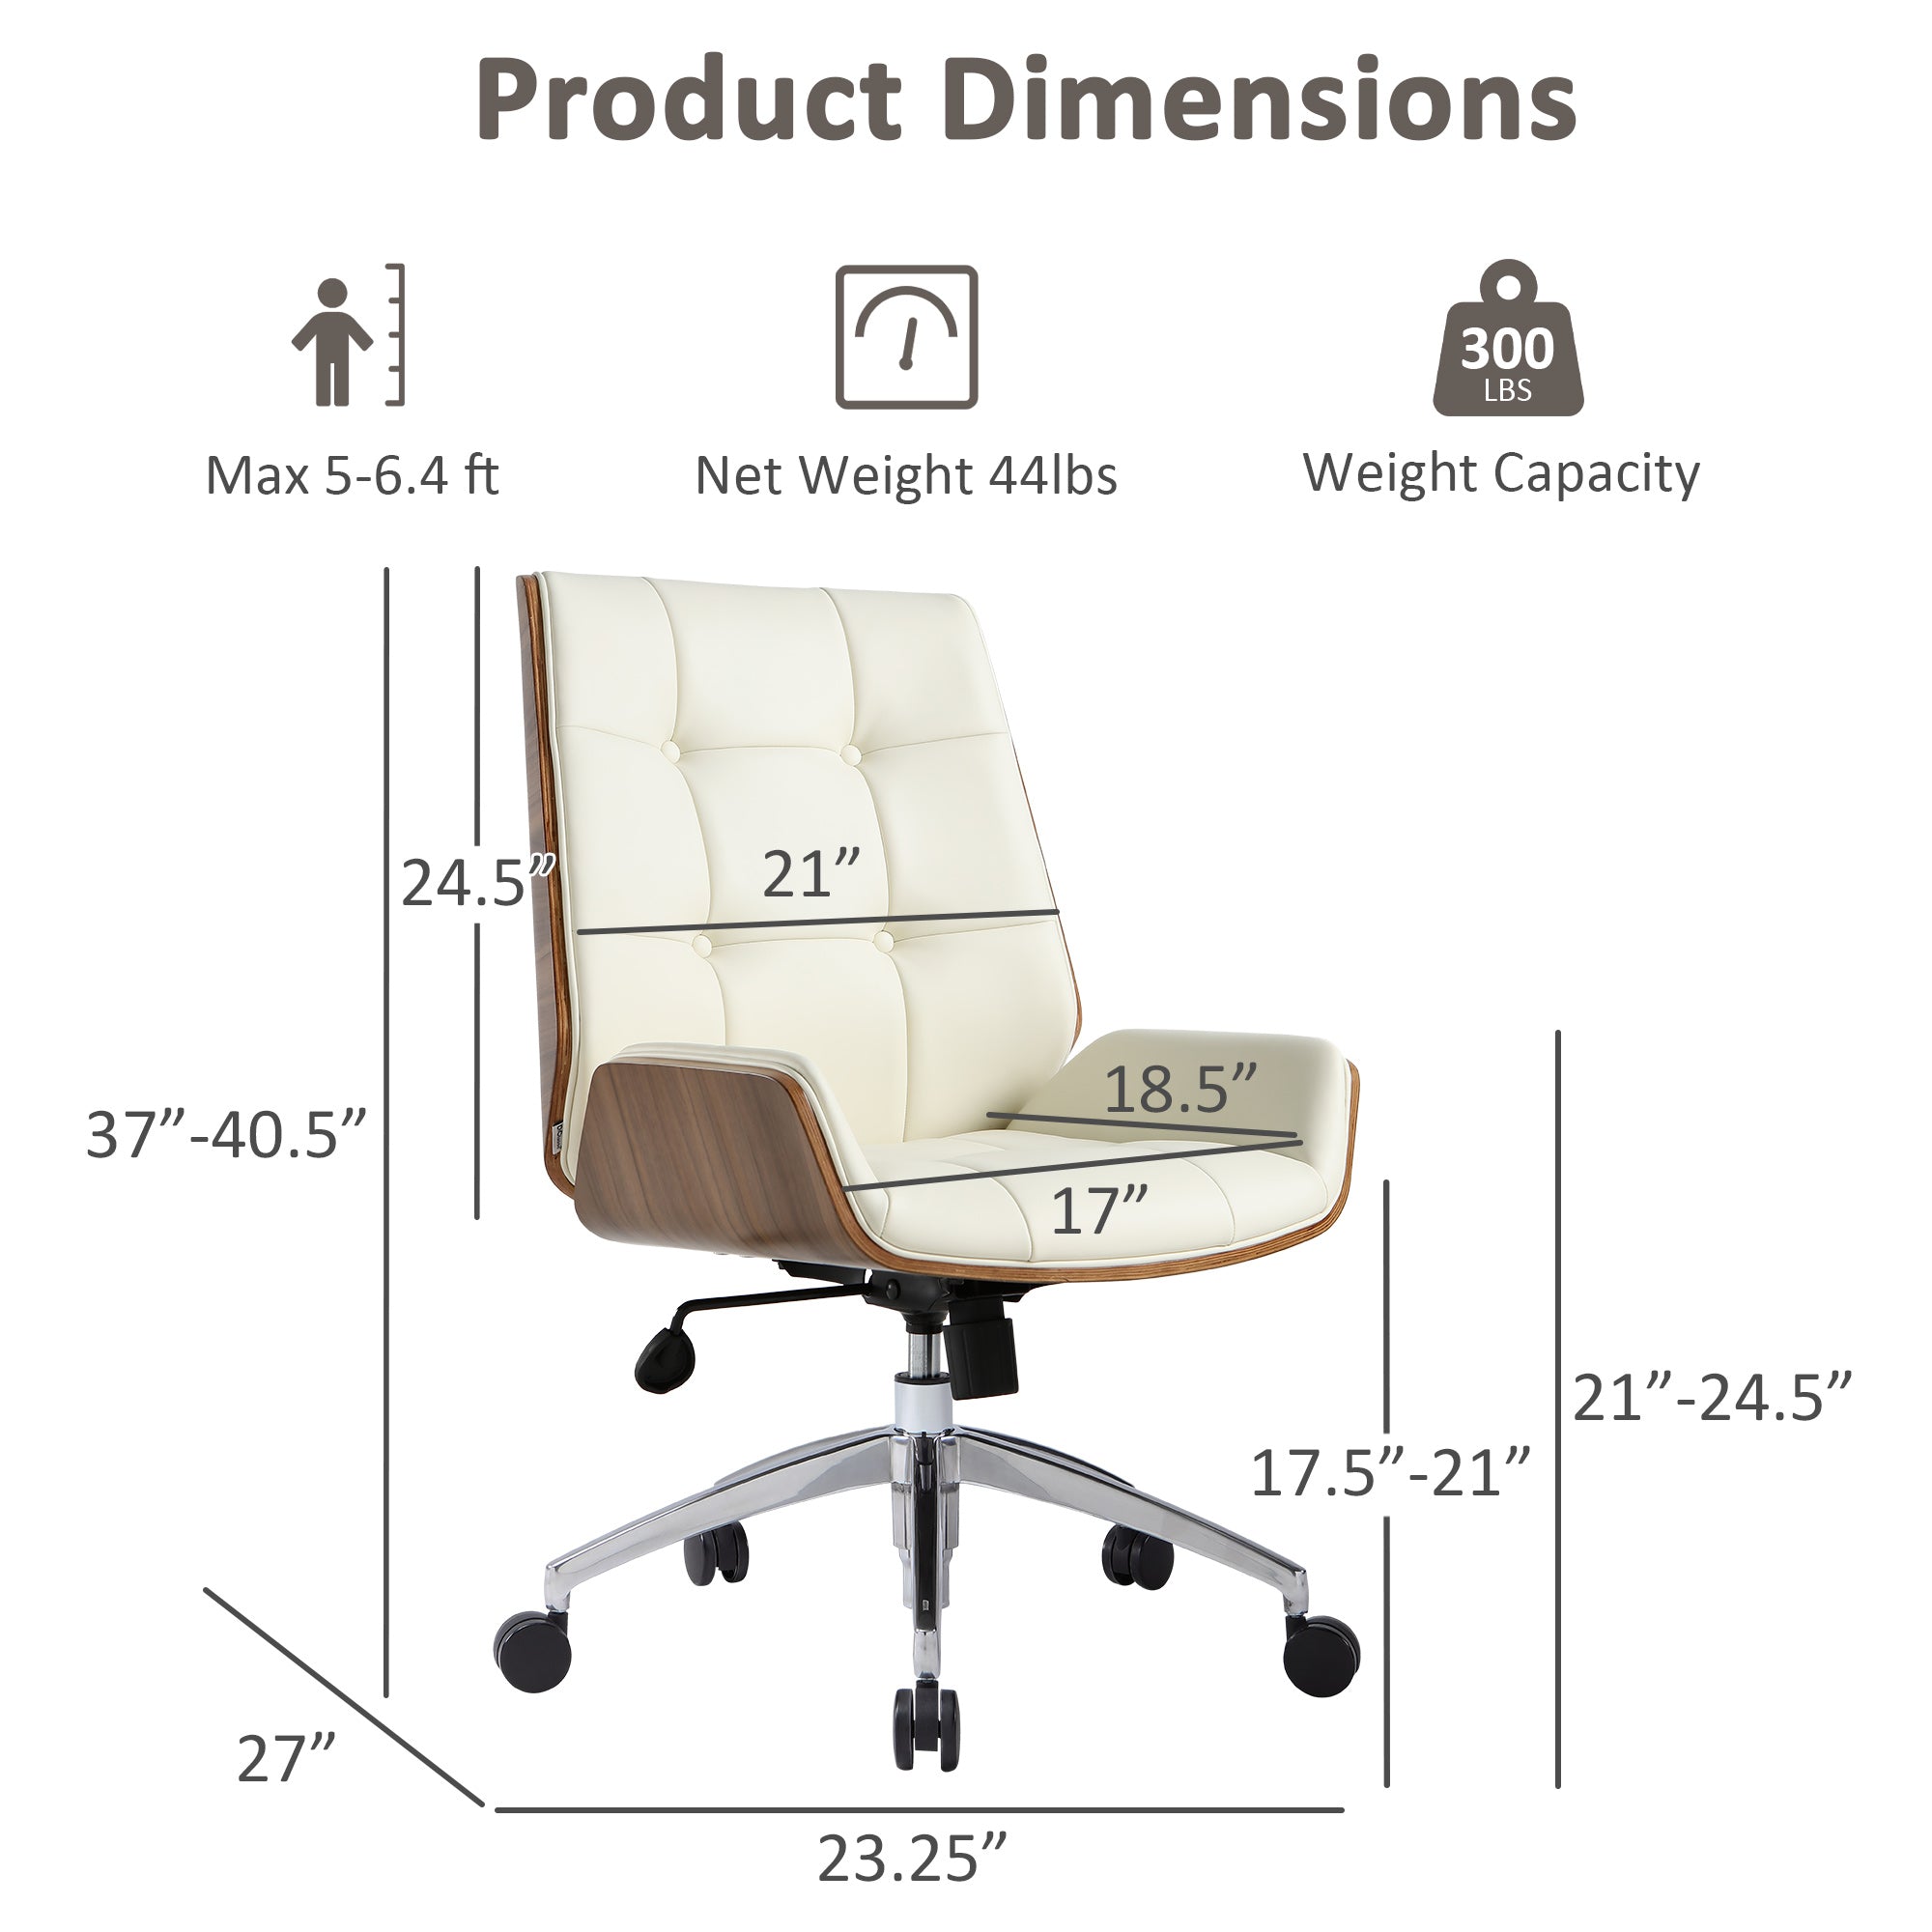 Executive Ergonomic Office Leather Chairs with Tilt and Height Adjustable, Cream White